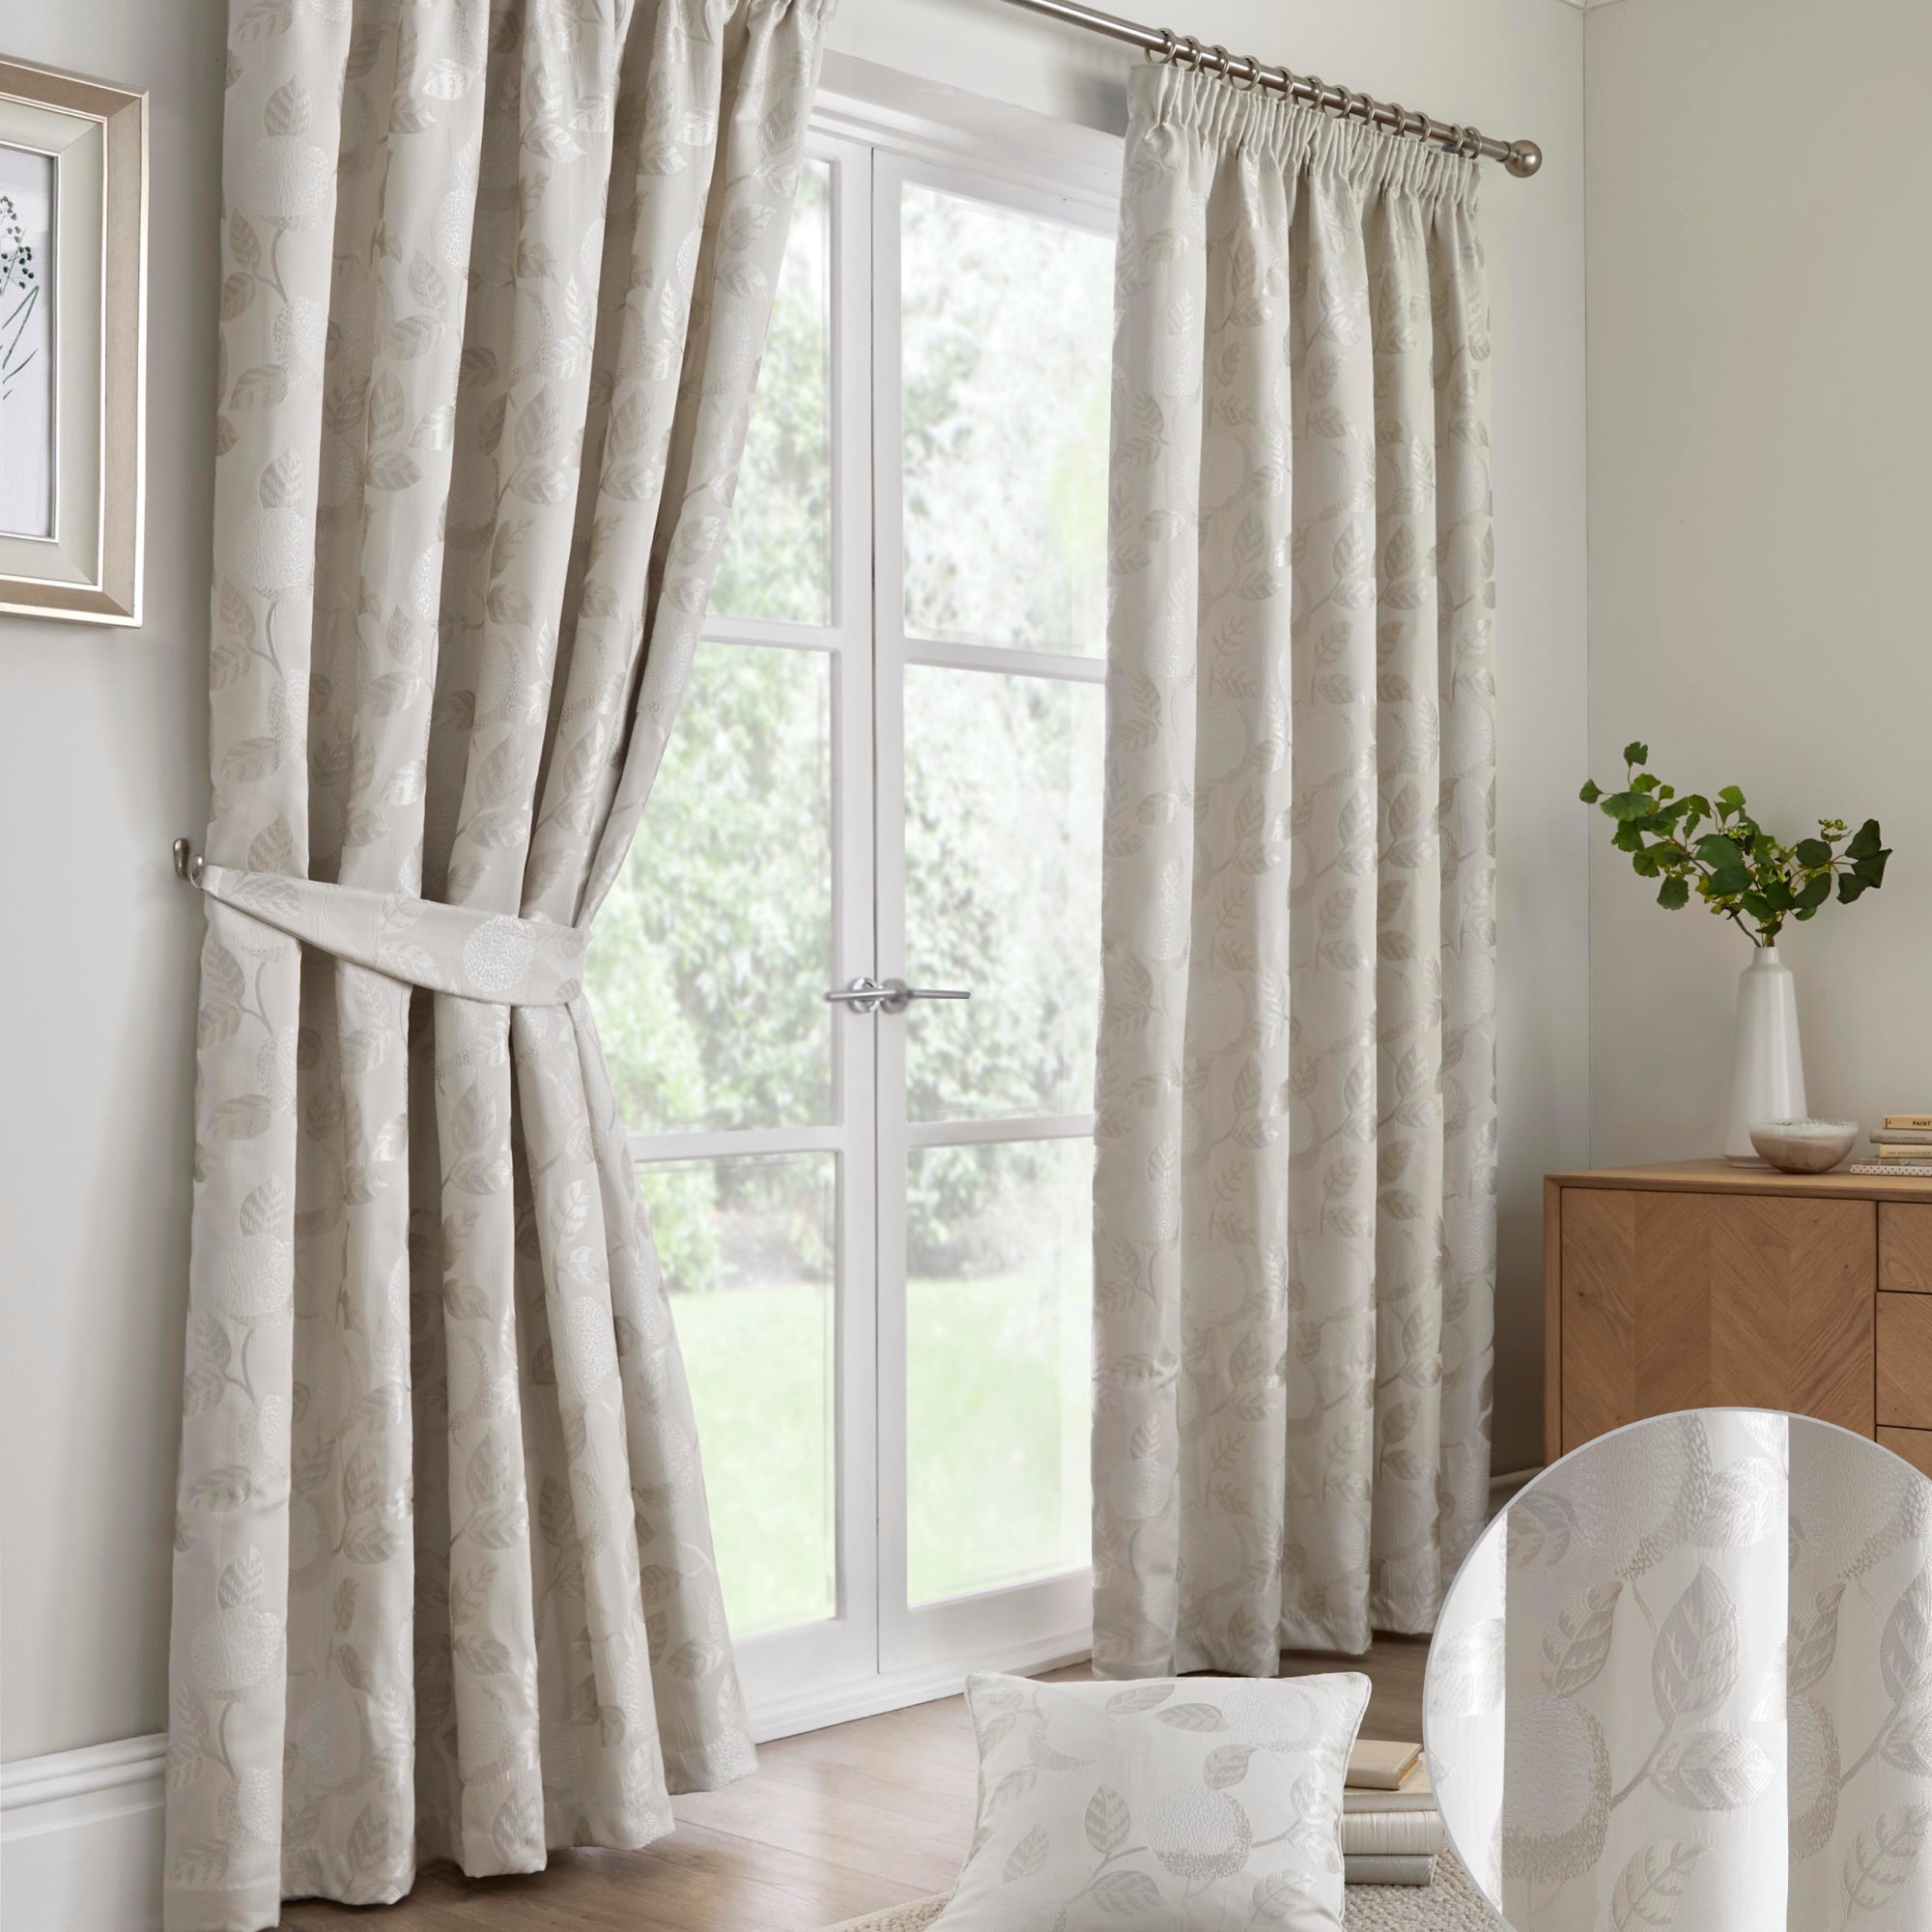 Pair of Pencil Pleat Curtains Bramford by Curtina in Natural